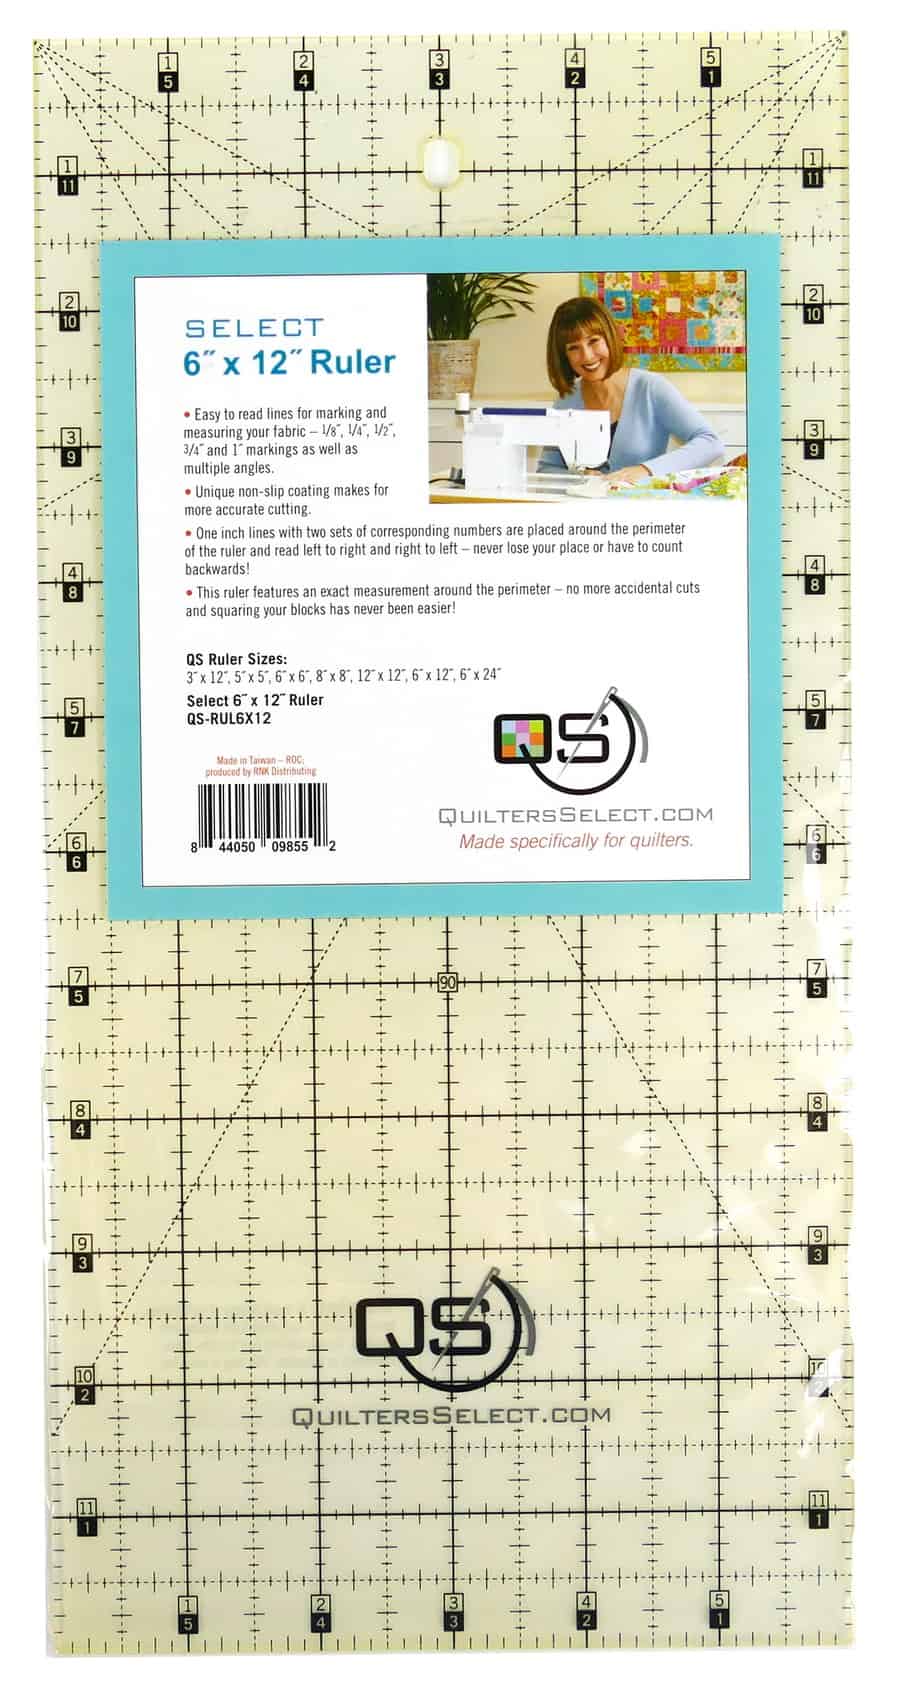 Quilter's Select 6 x 12 Ruler, Quilter's Select #QS-RUL6X12